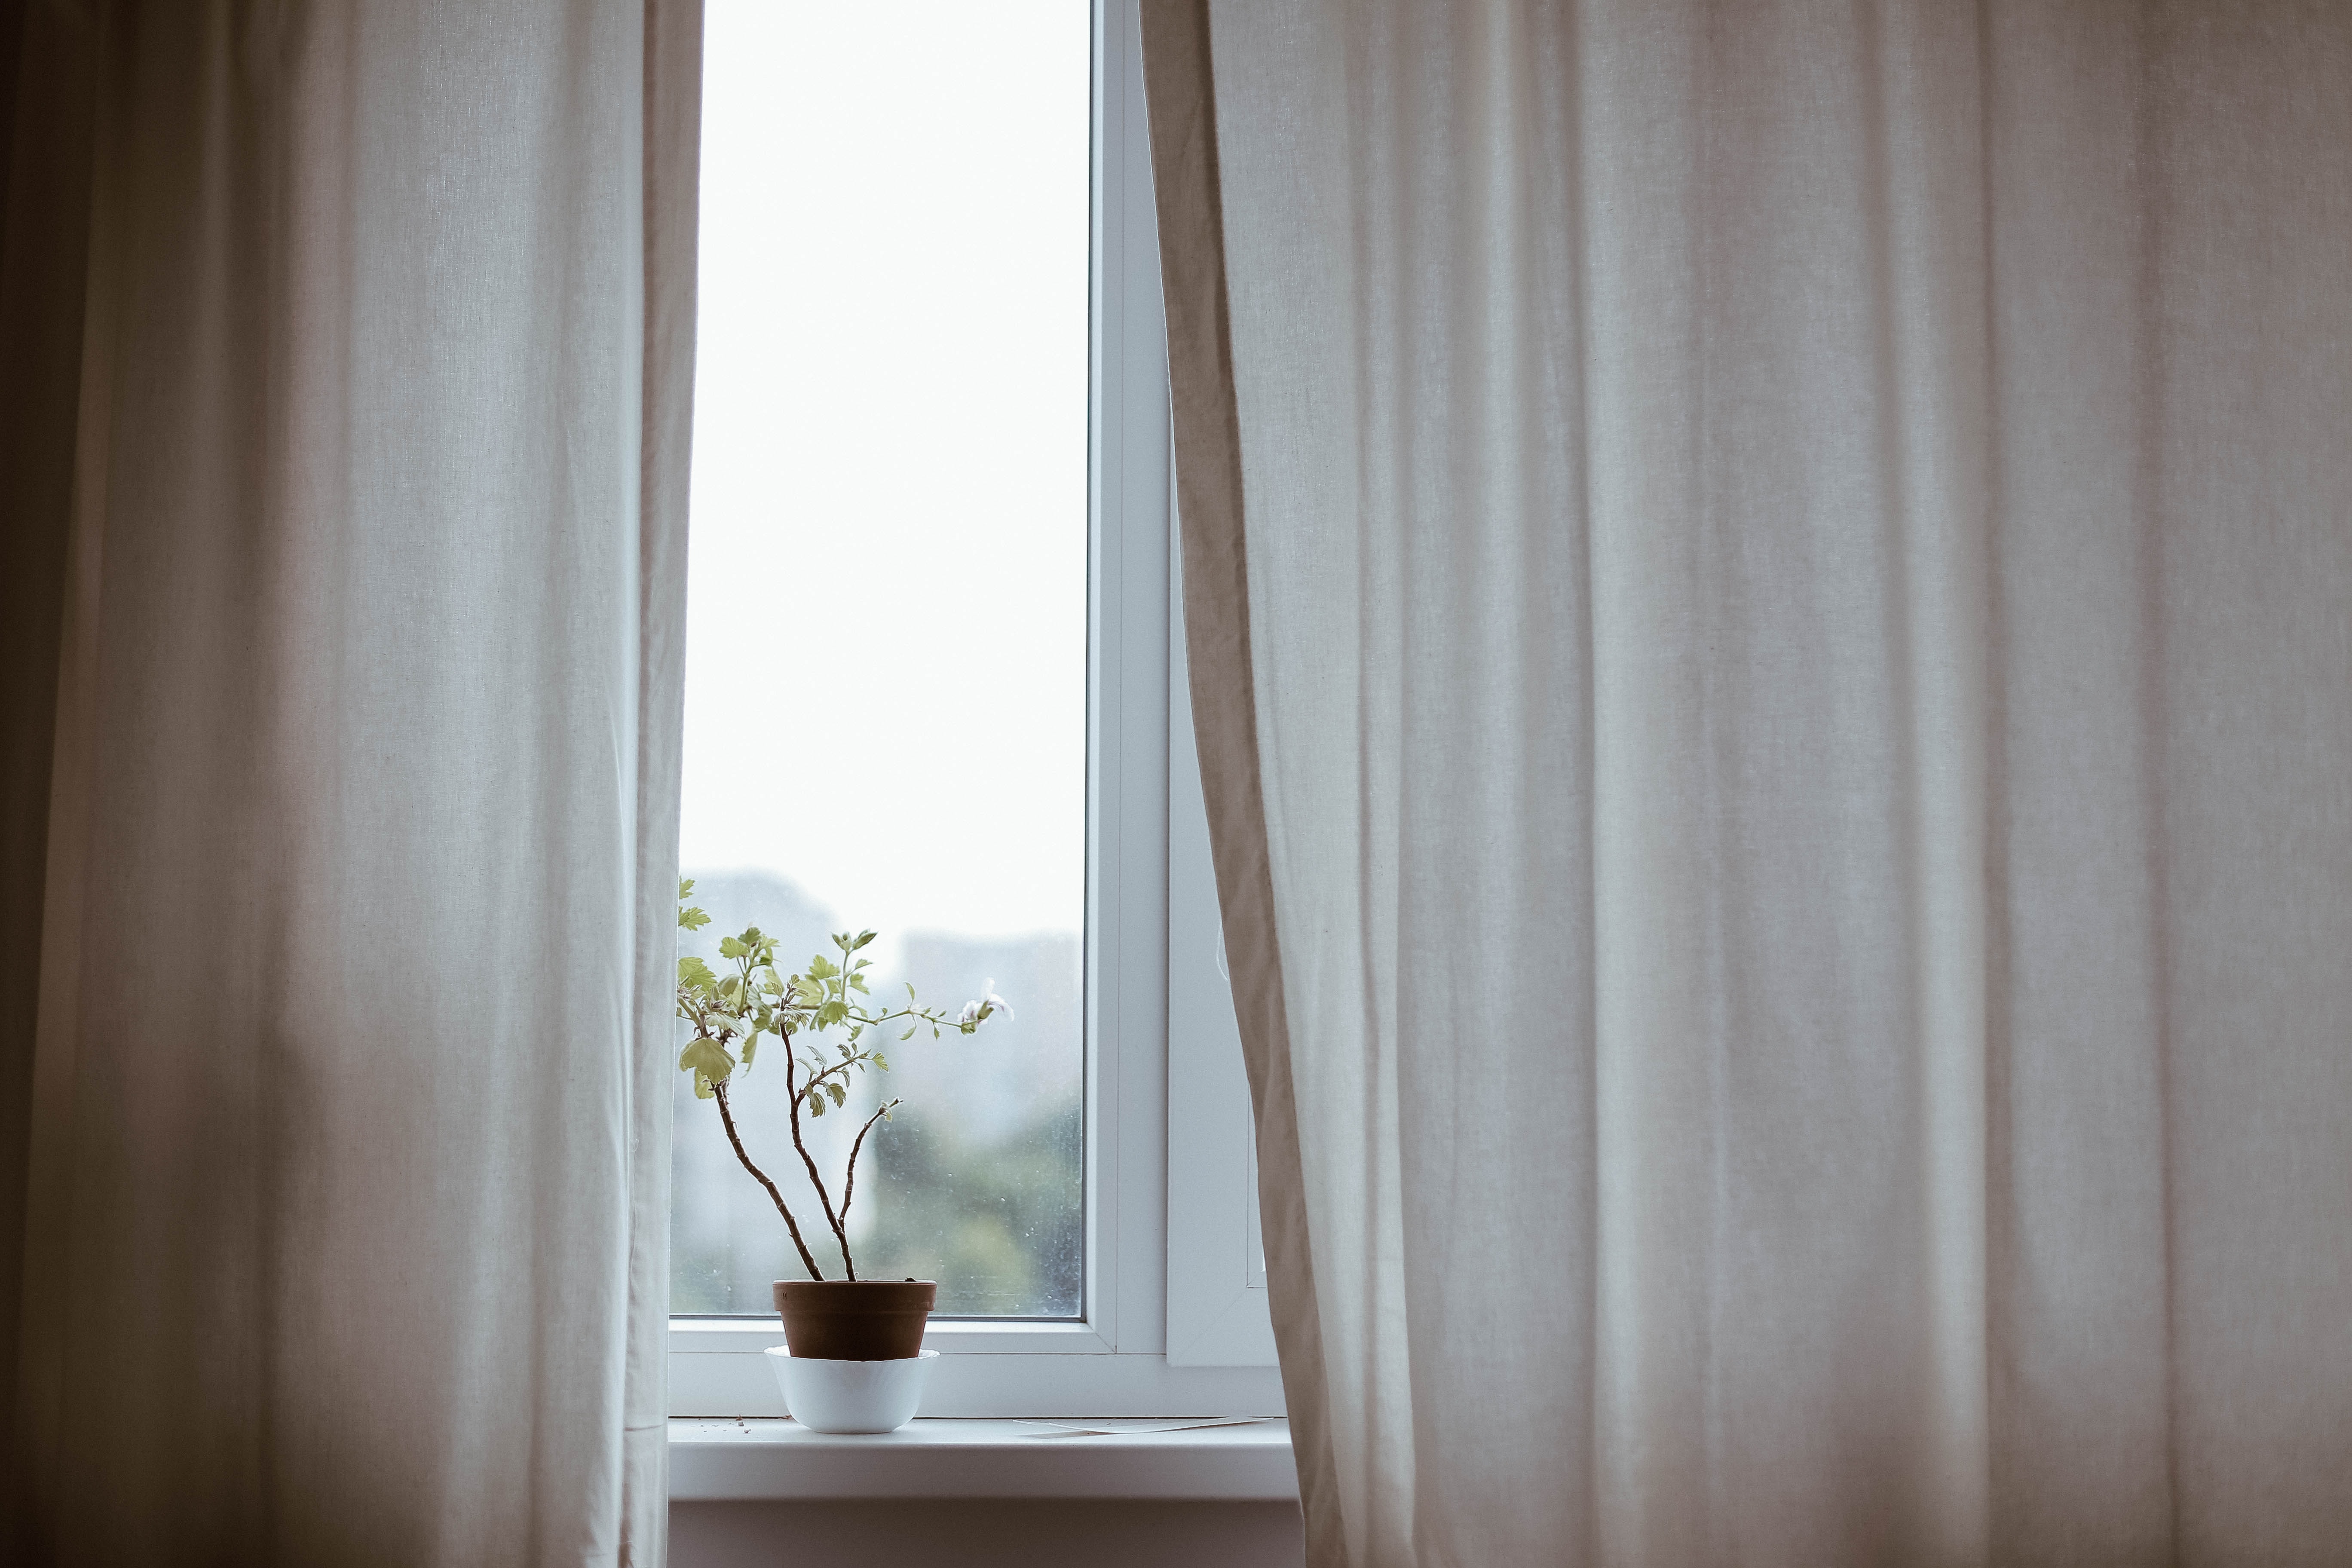 Image of curtain and plant